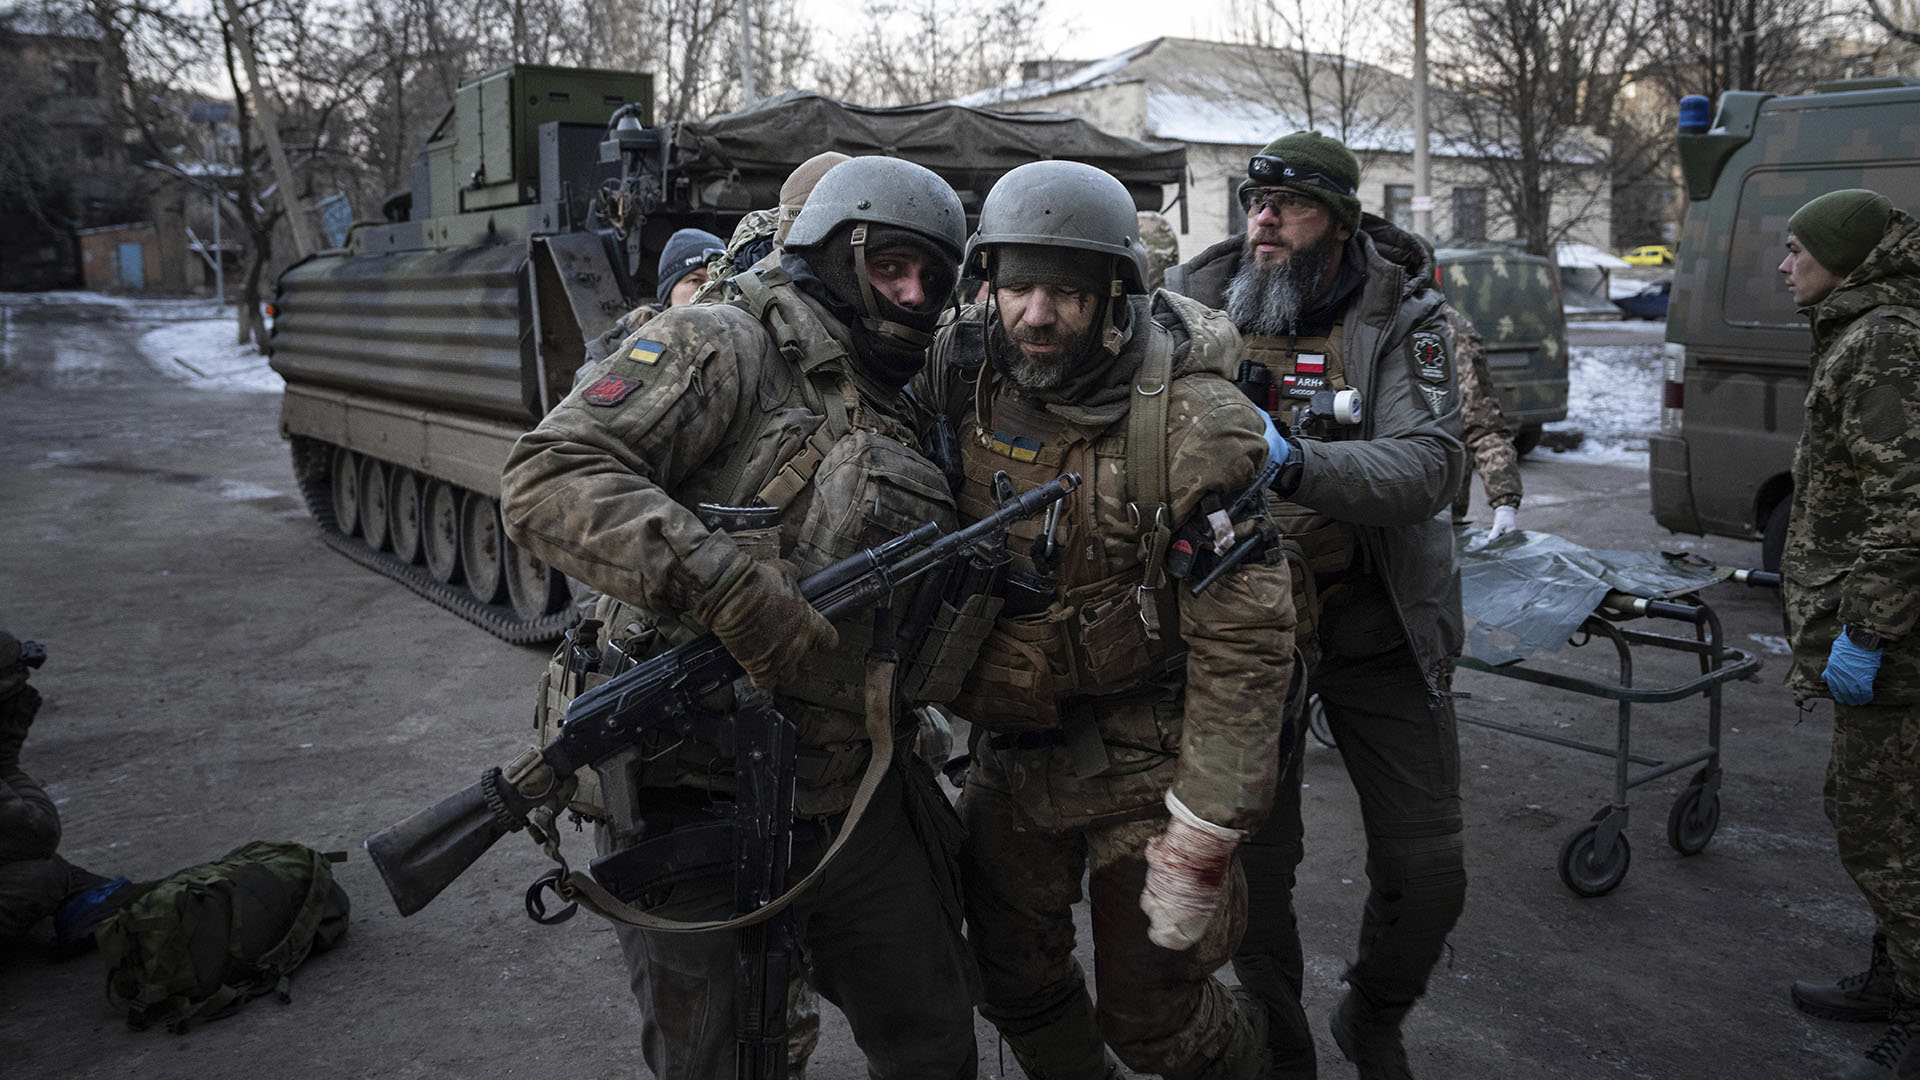 A Ukrainian serviceman carries his wounded comrade evacuated from the battlefield to a hospital in the Donetsk region, Ukraine, Monday, Jan. 9, 2023. (AP Photo/Evgeniy Maloletka)